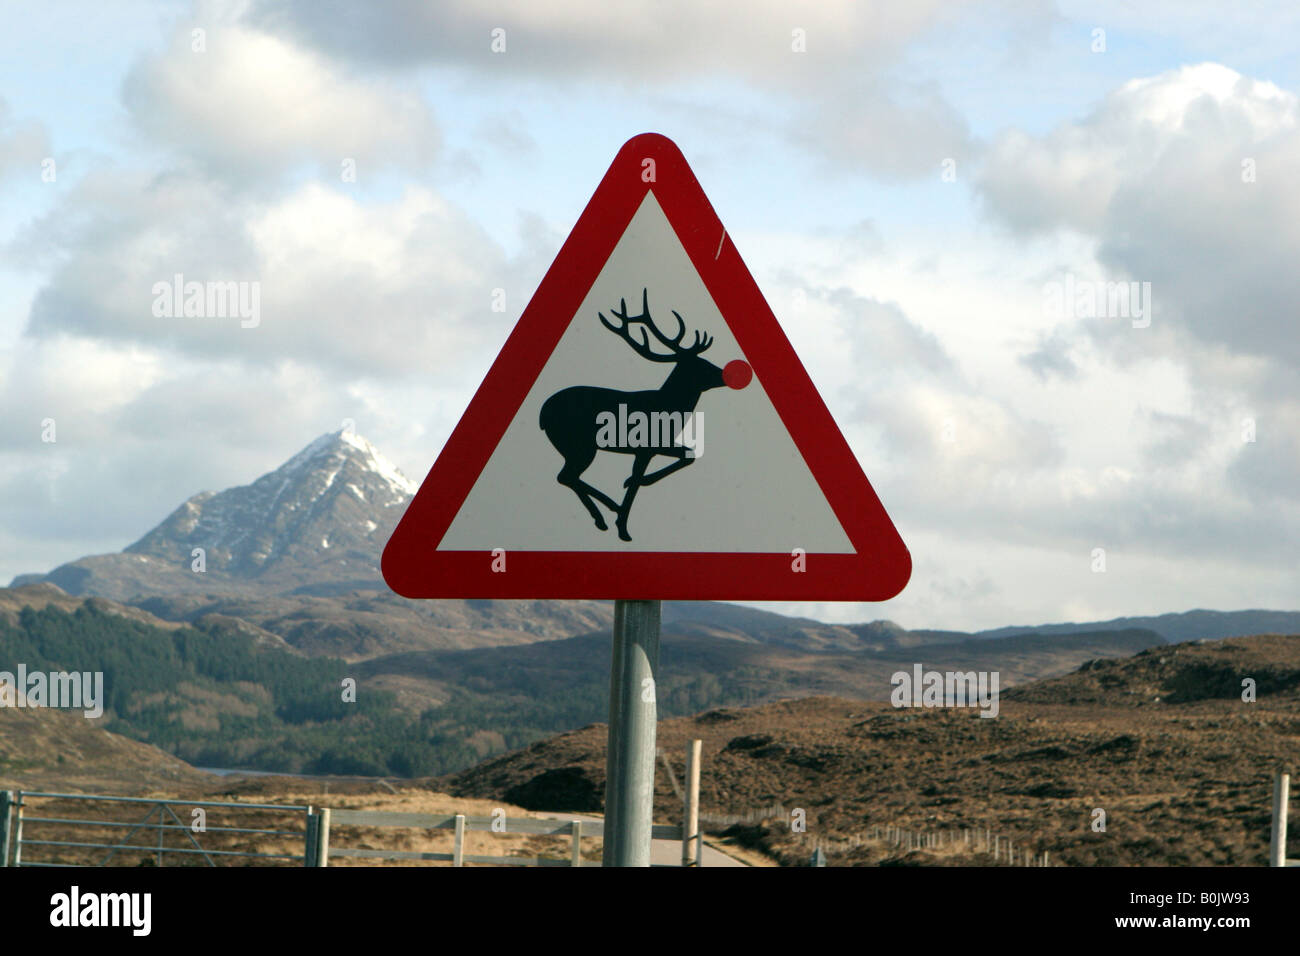 Red triangle sign warning of deer on the roads Stock Photo